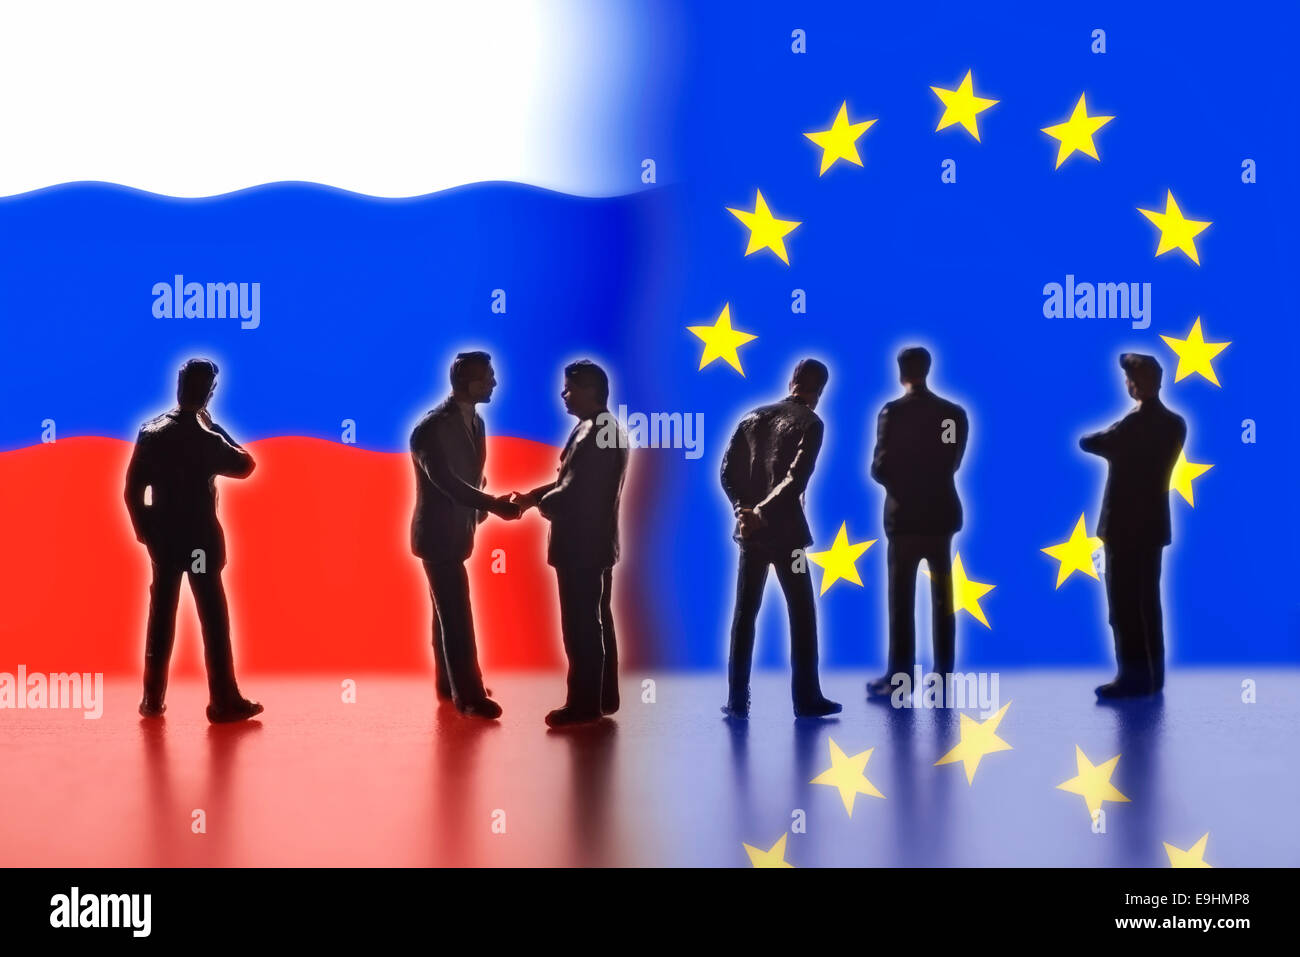 Model figures symbolizing the politicians are faced with the flags of Russia and the EU. Two of them shake hands. Digital Composite (DC) Stock Photo